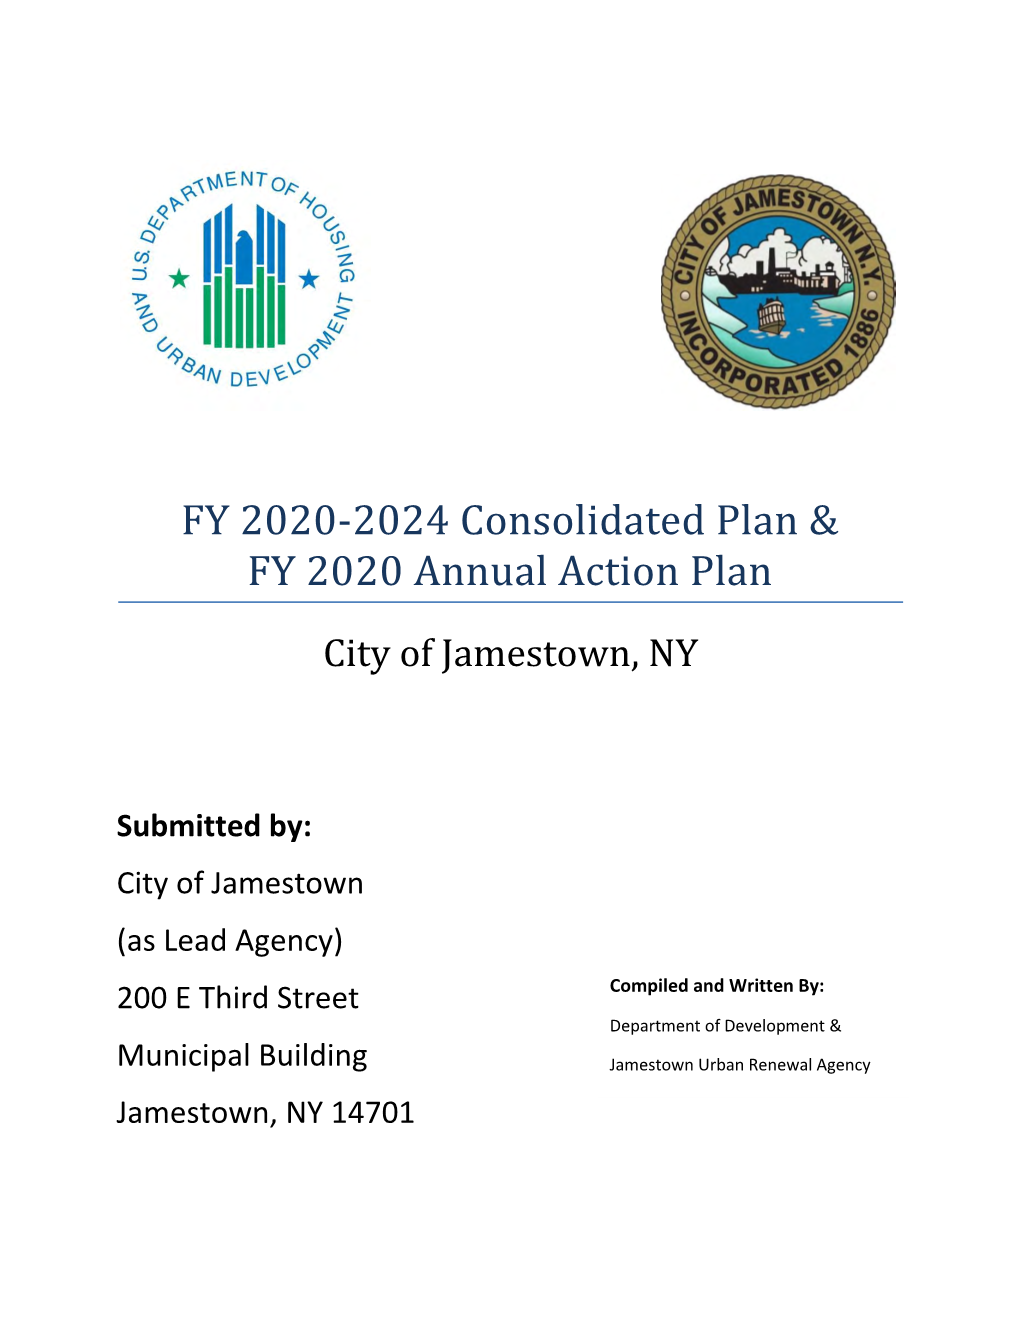 2020-2024 Consolidated Plan & Annual